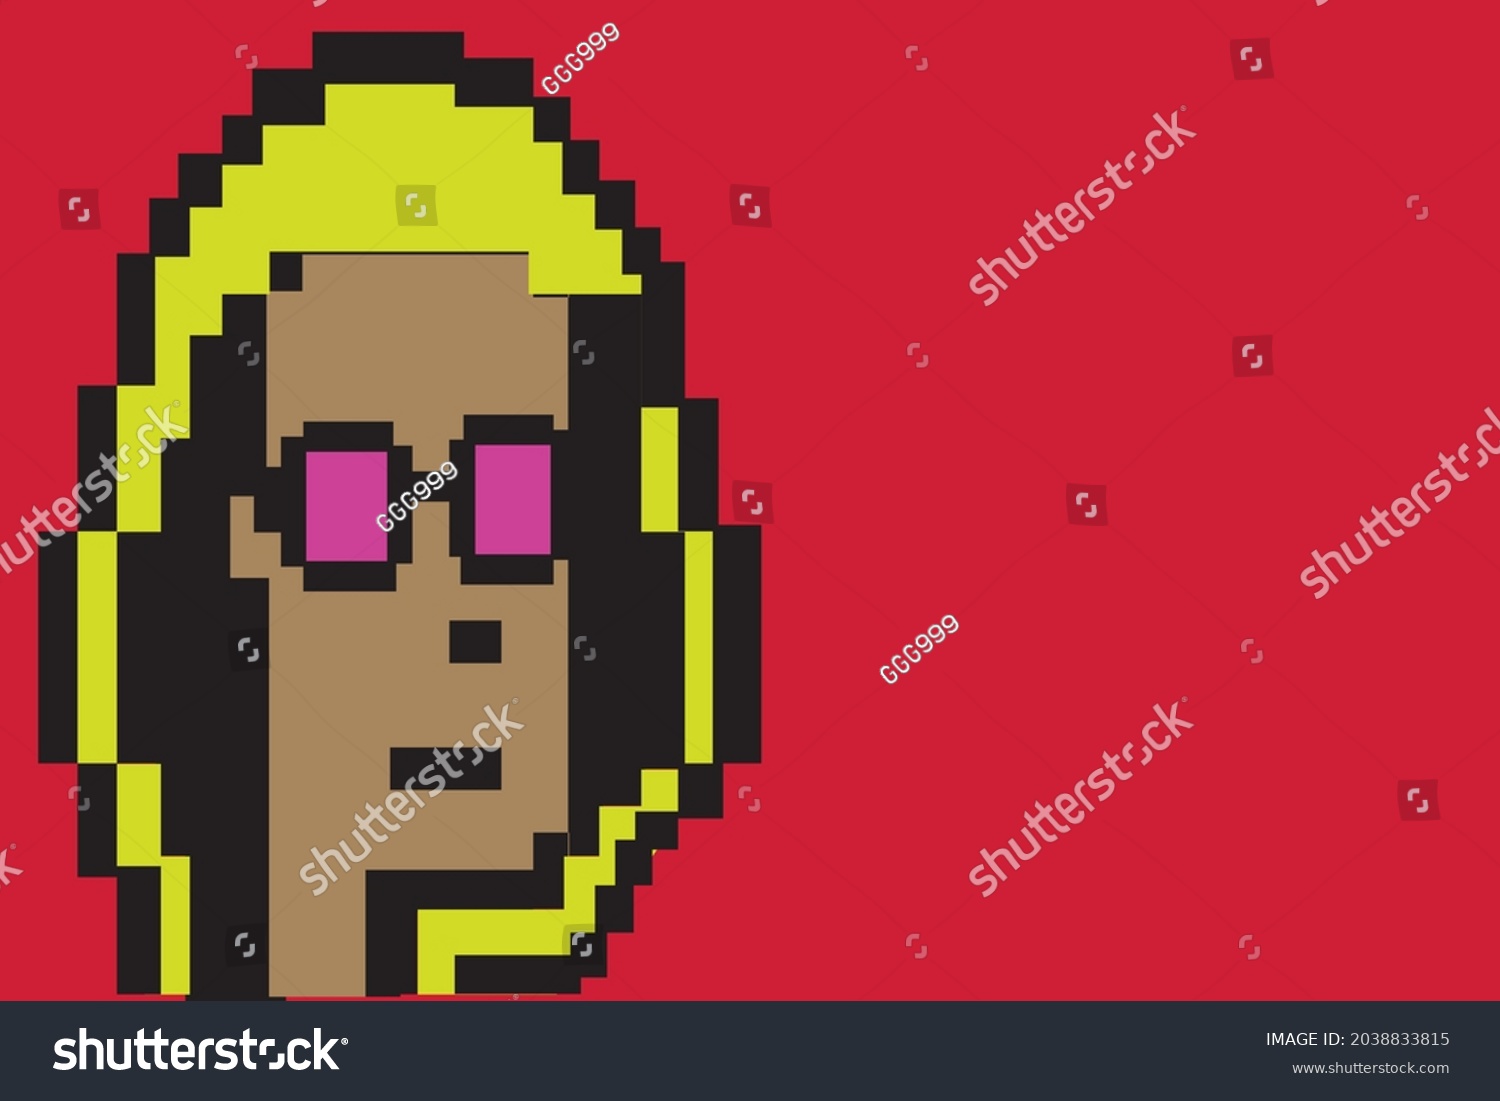 SVG of Cryptopunk NFT blockchain, non fungible. Pixel art character yellow hood. red background  svg